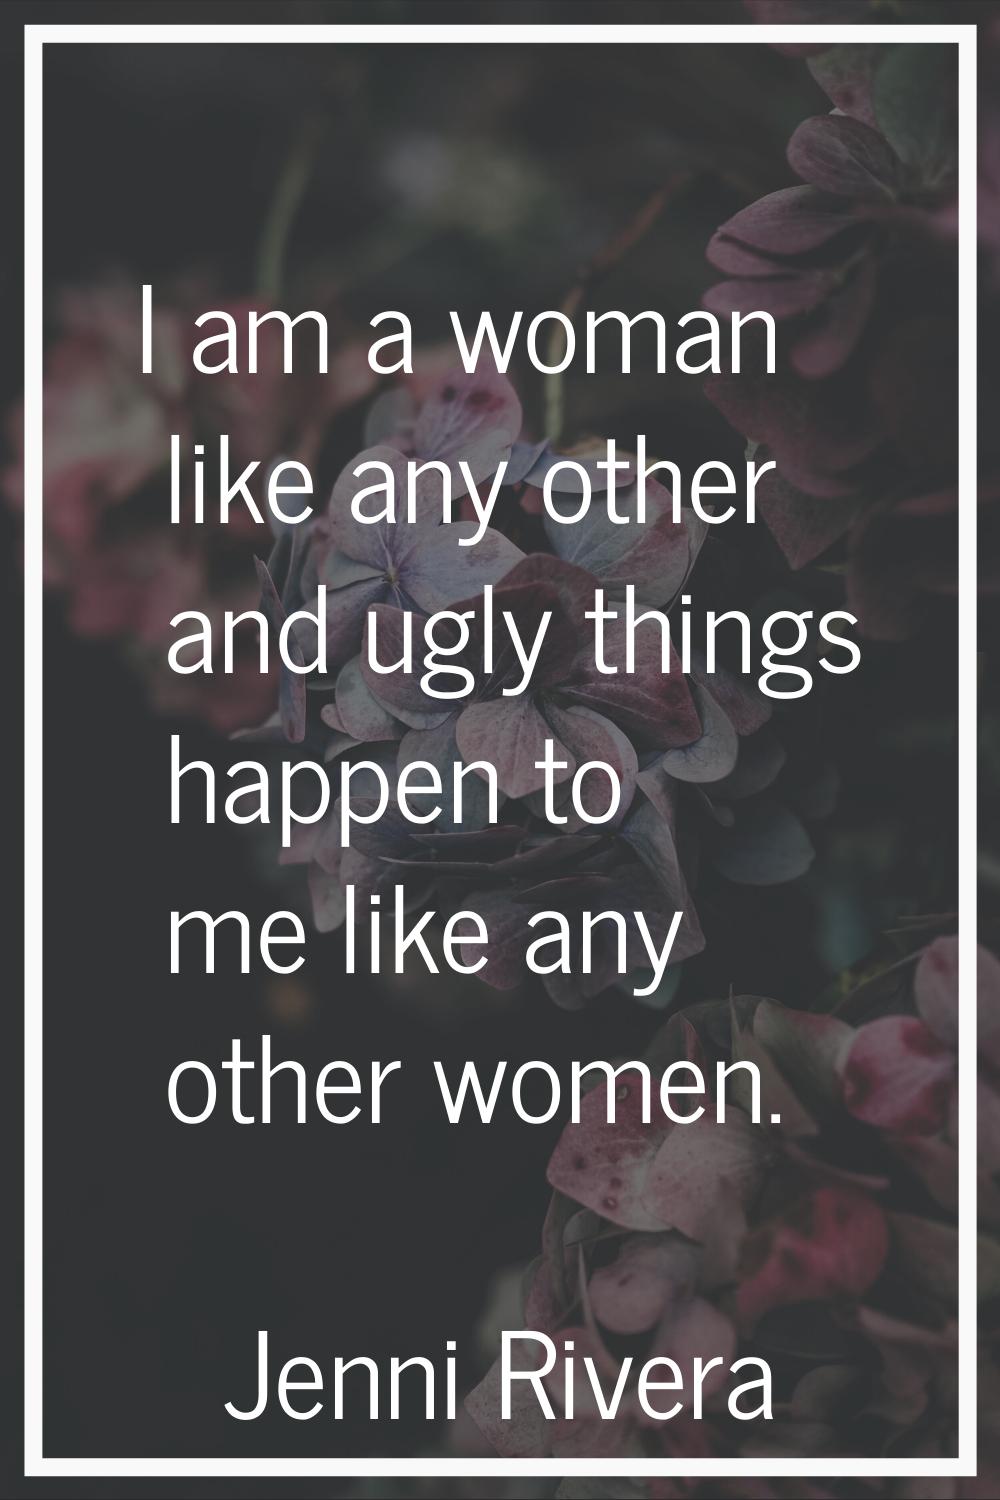 I am a woman like any other and ugly things happen to me like any other women.